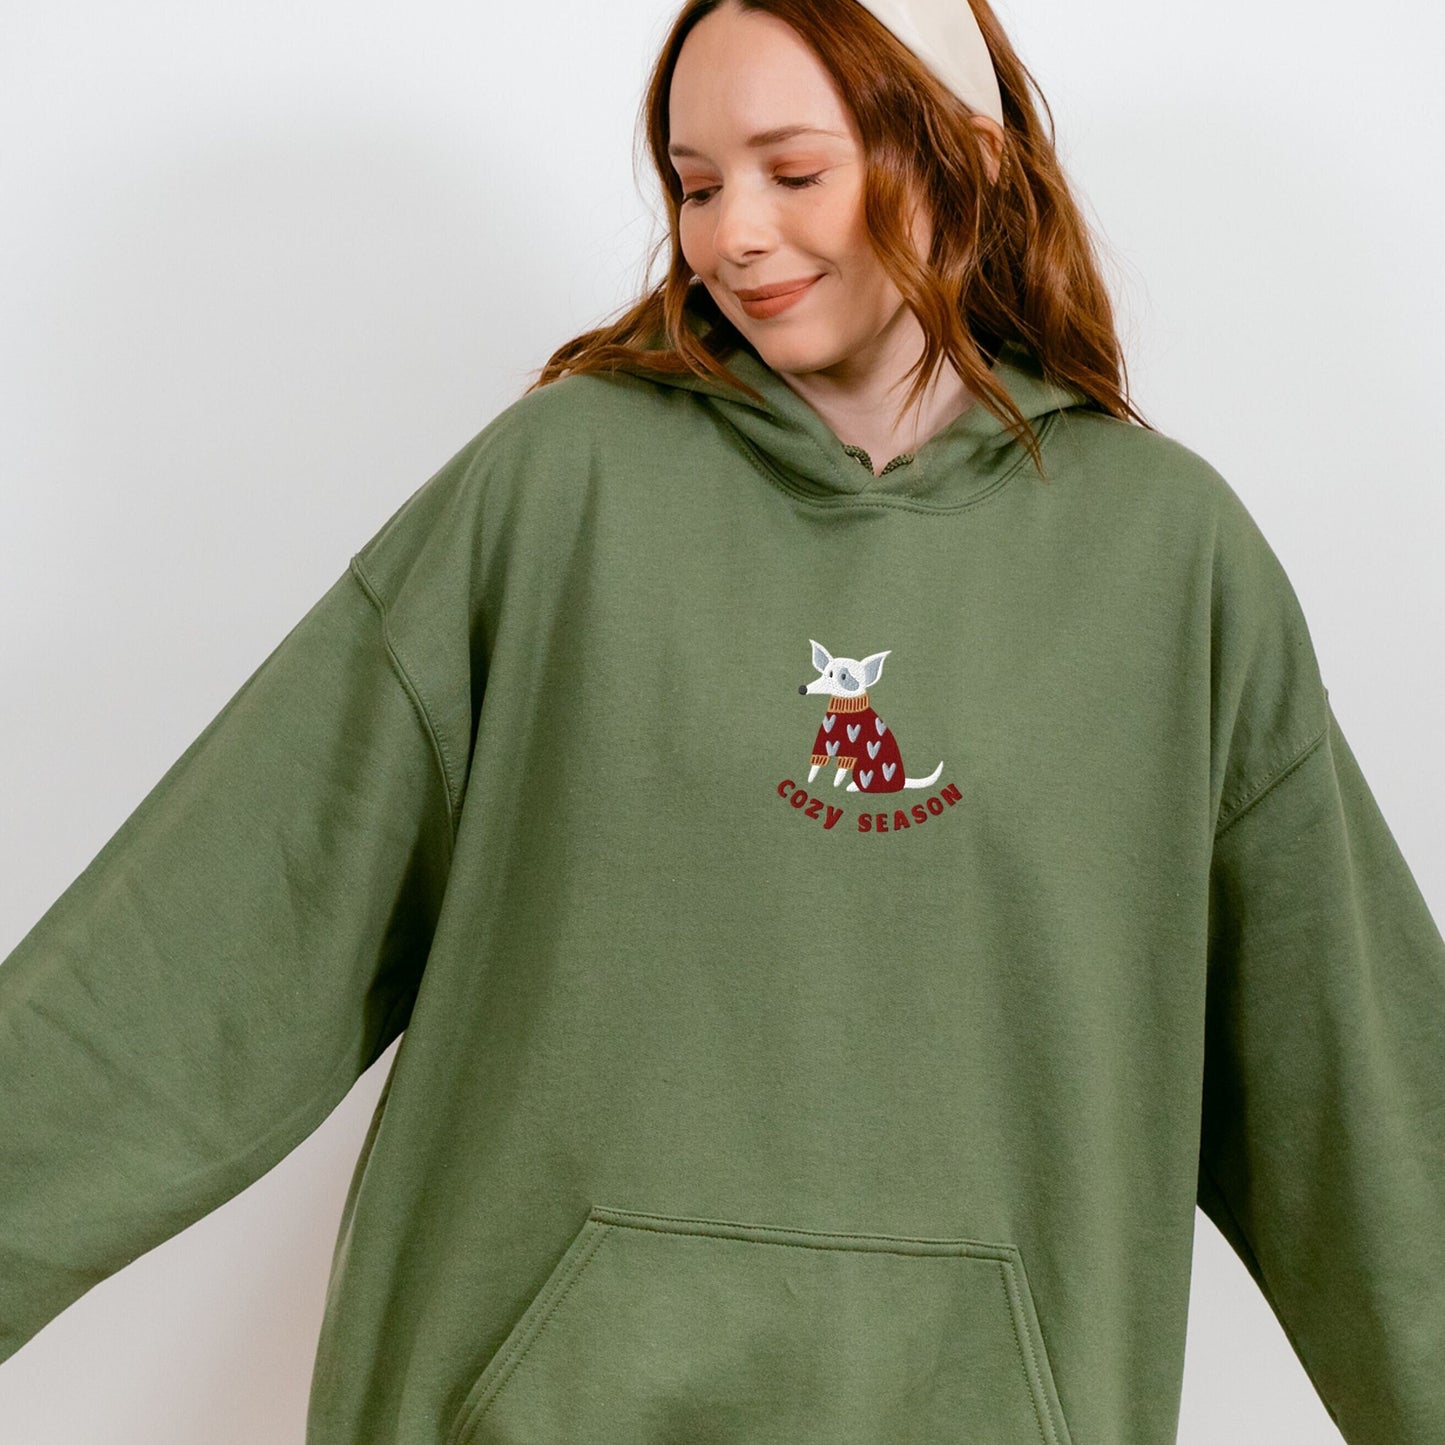 Embroidered Dog Sweatshirt Cozy Season Dog Hoodie For Women Embroidery Hoodie Dog Owner Gifts Fall Sweatshirt Embroidered Women's Dog Shirt